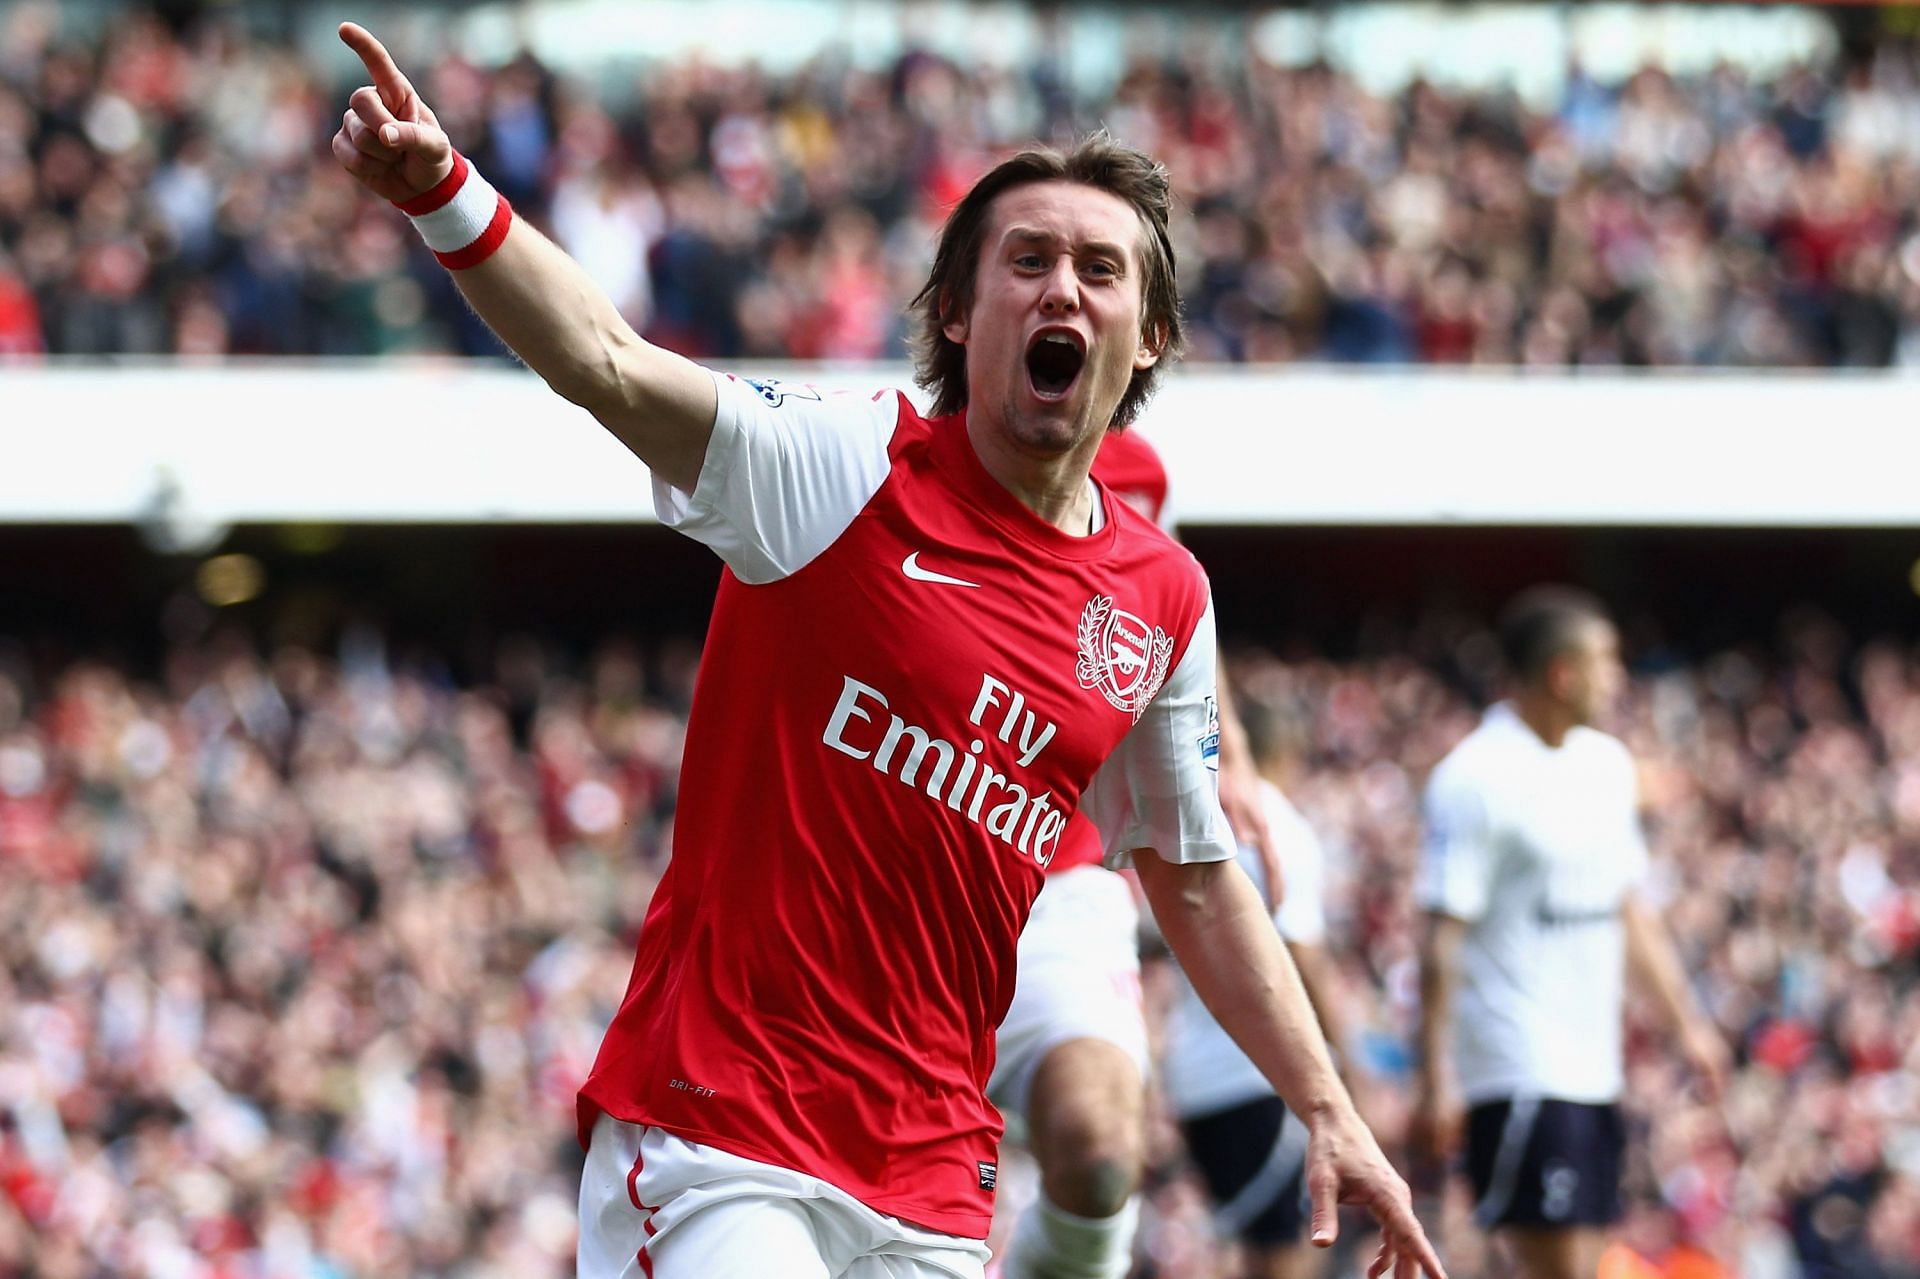 Rosicky is ecstatic after scoring a stunning goal against Tottenham Hotspur.